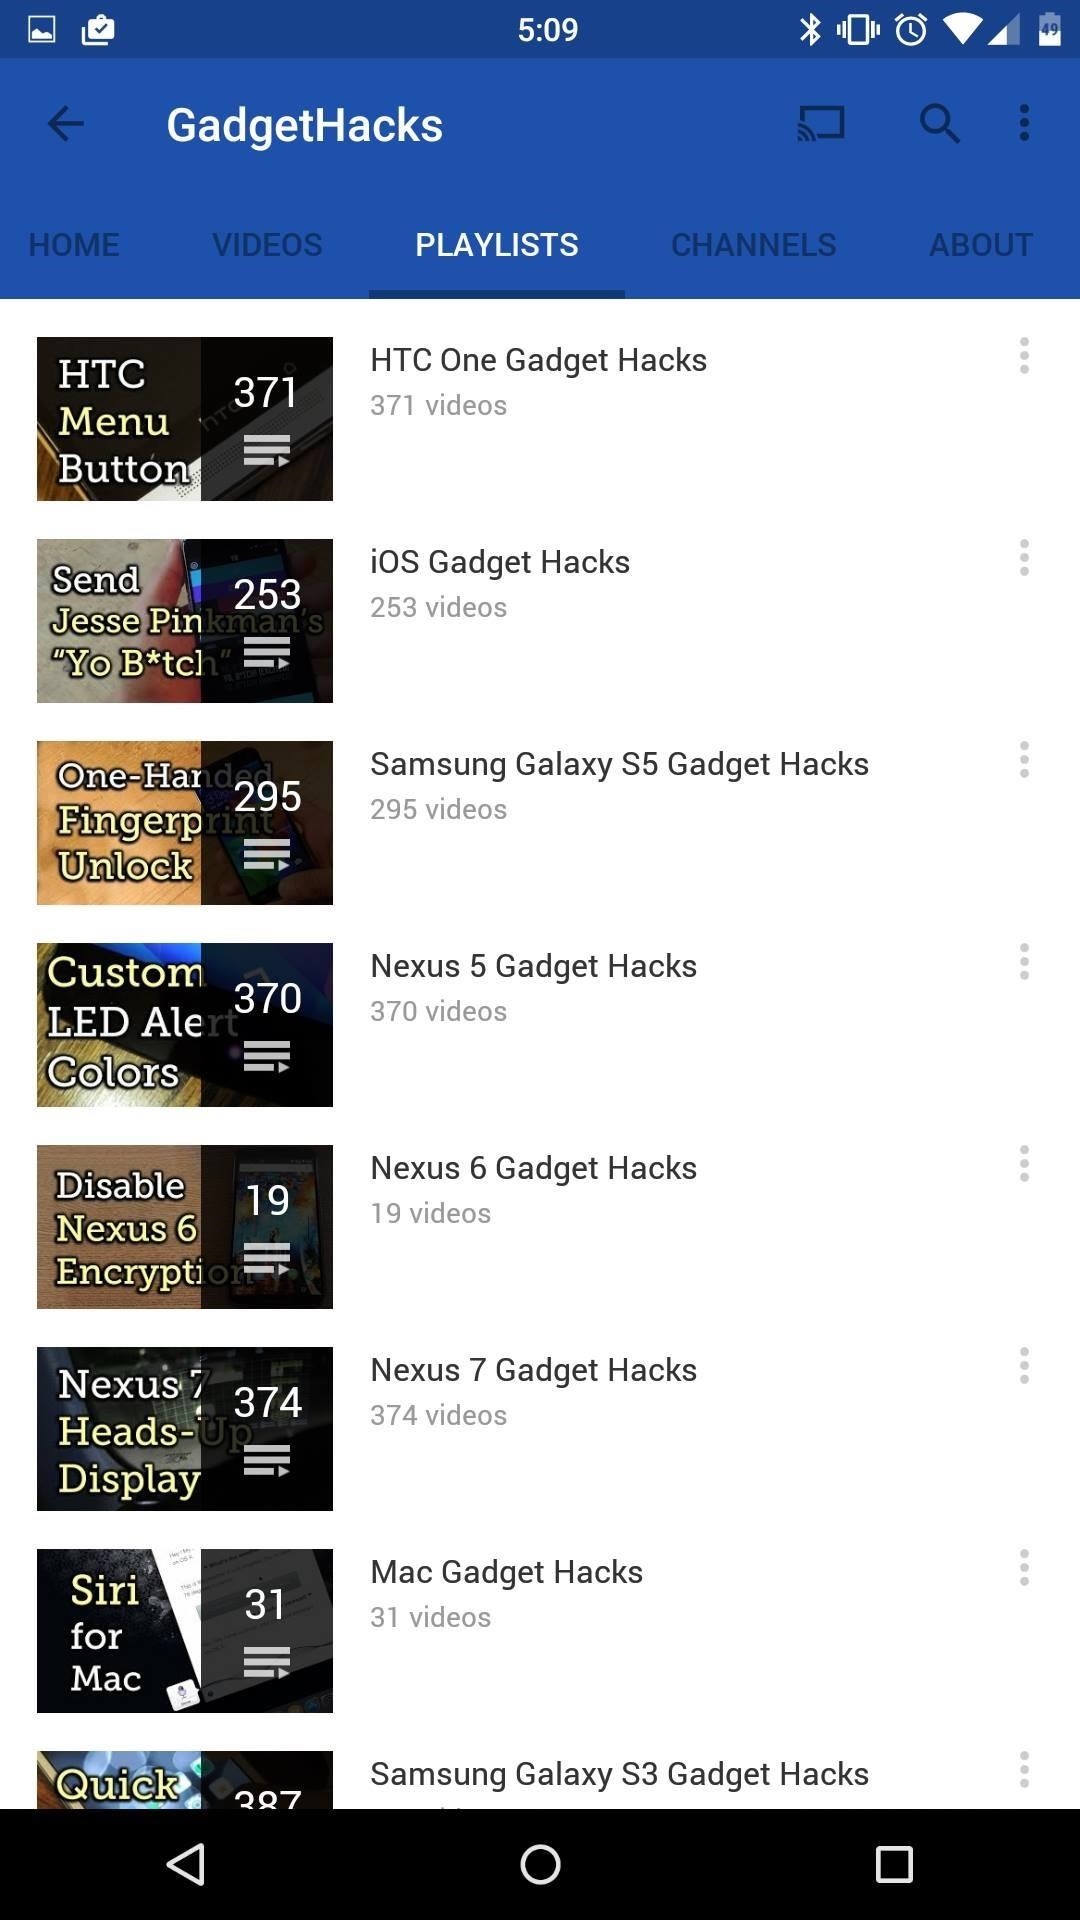 YouTube Finally Receives Its Material Design Makeover (APK Inside)